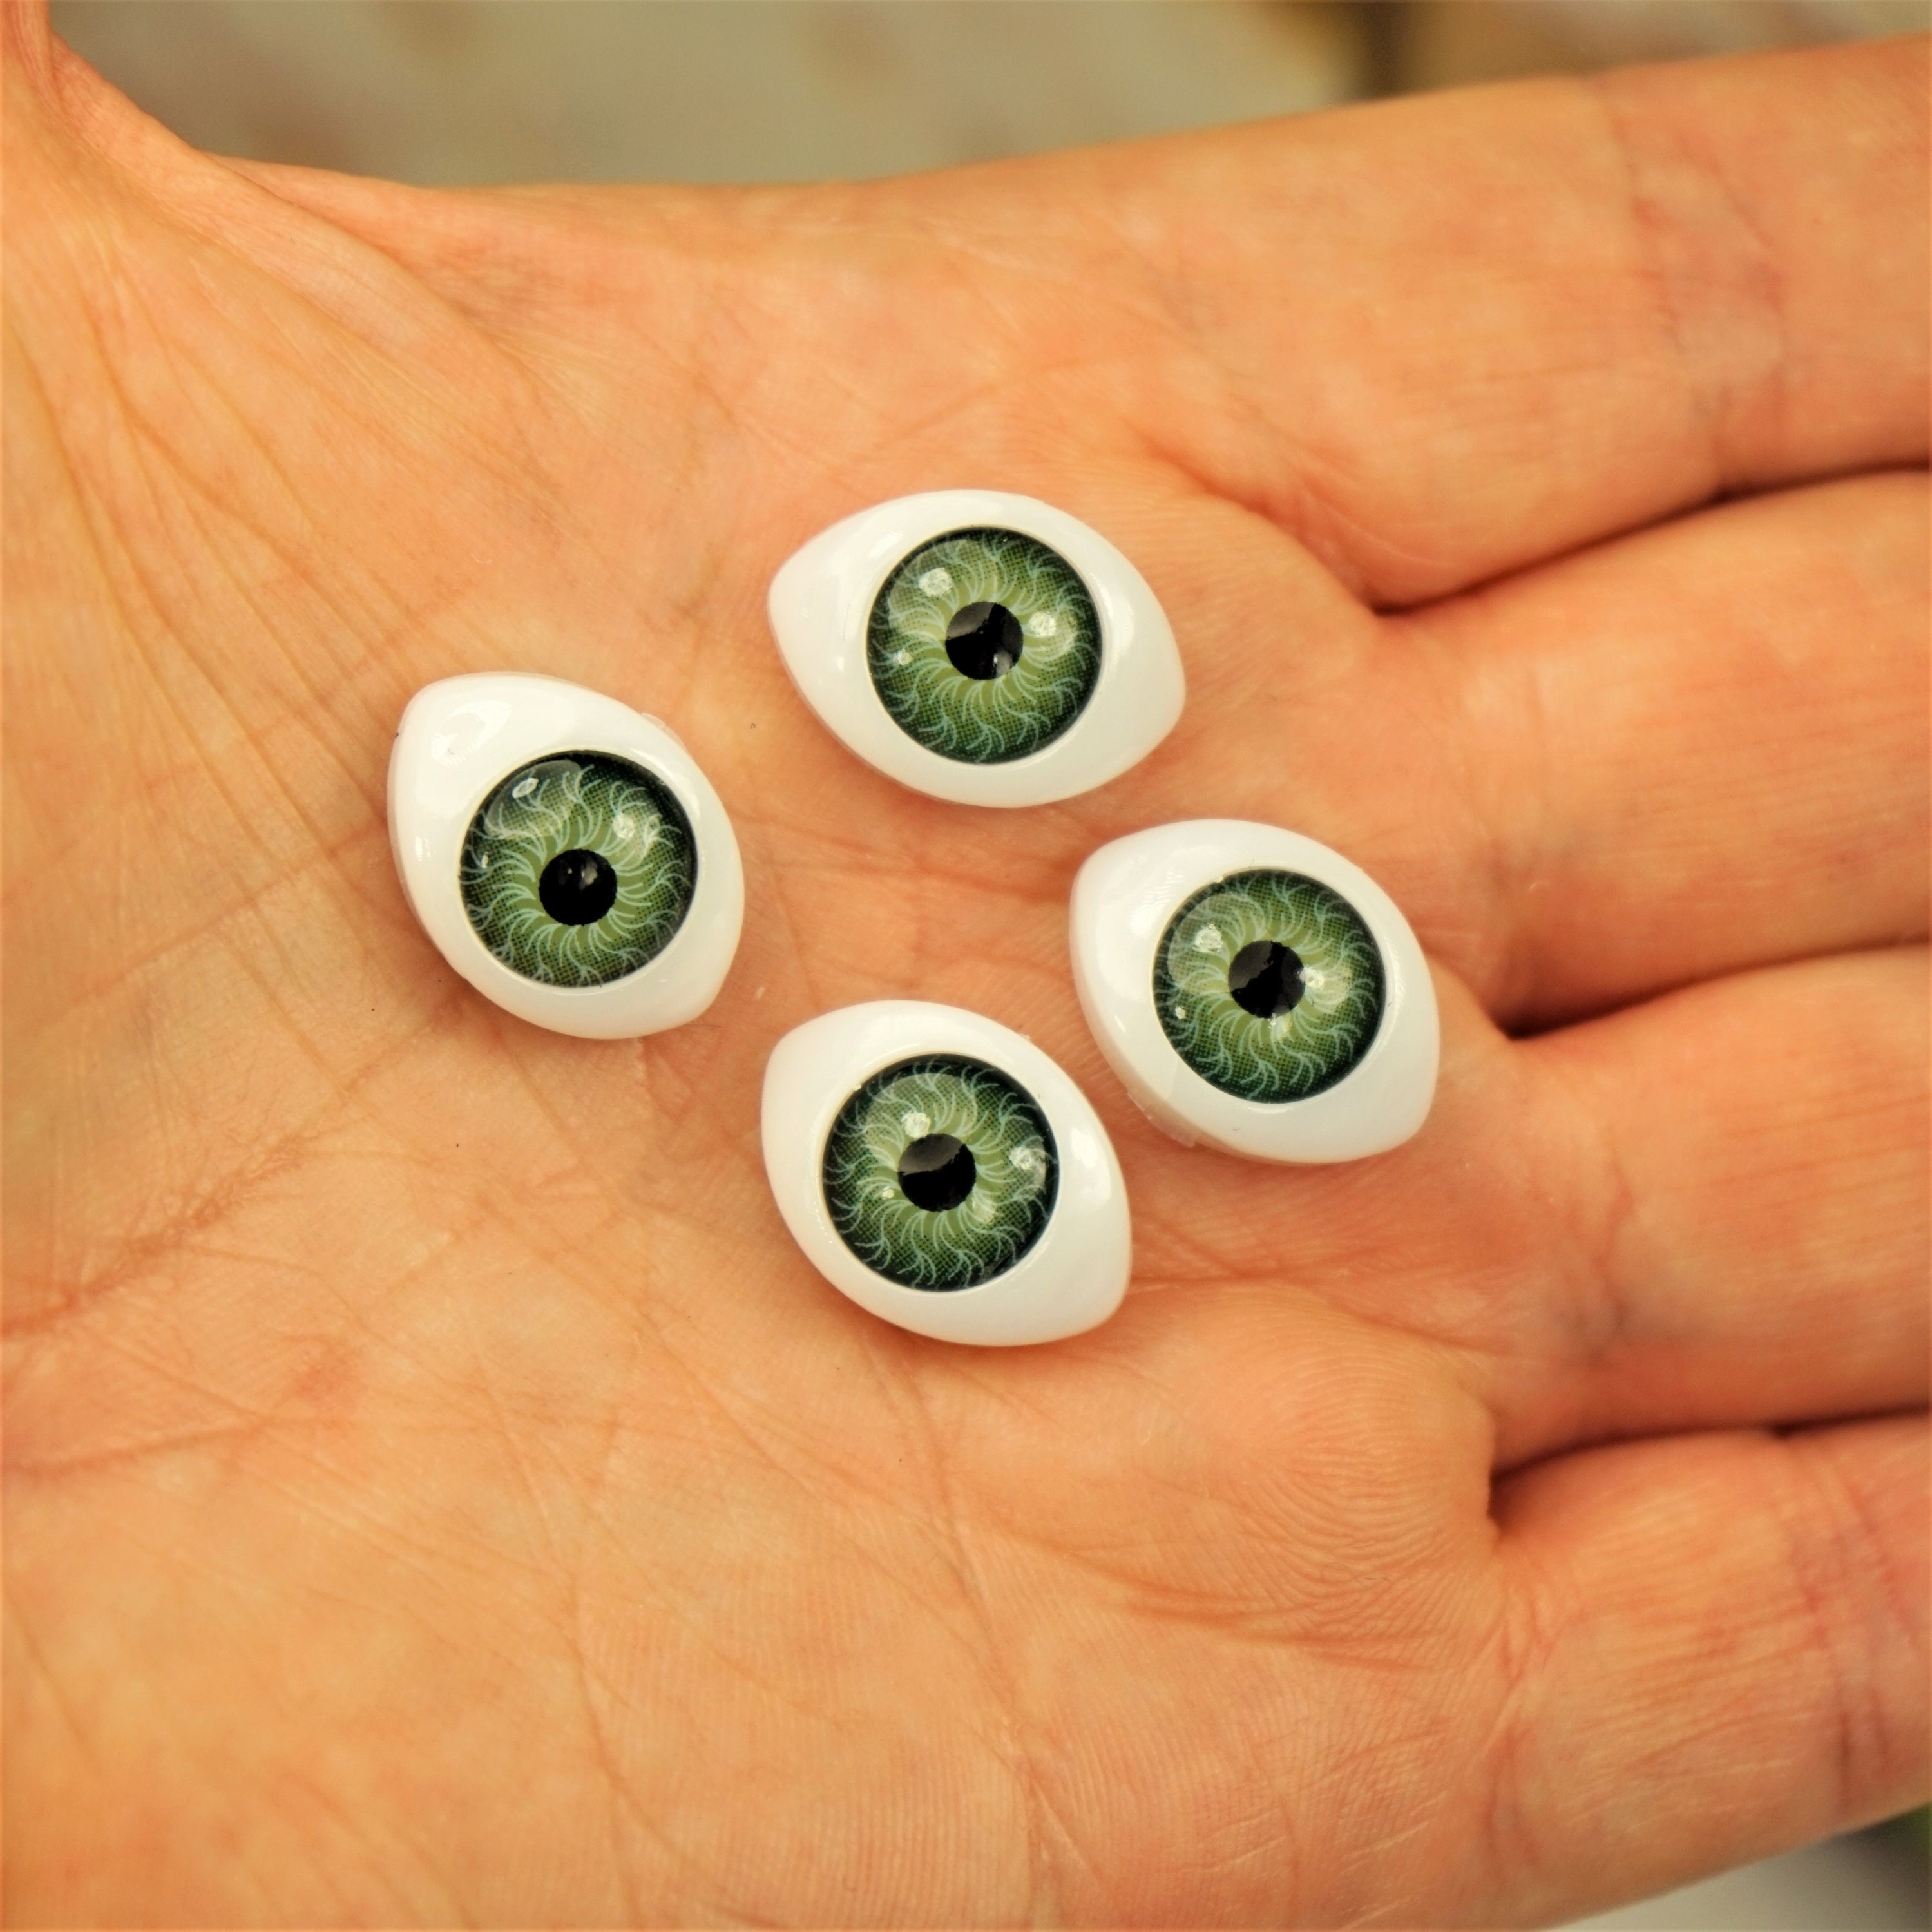 EXCEART 400 Pcs Glass Eye Patch Decor Doll Eyes for Crafts Craft Eyes  Eyeballs for Crafts DIY Glass Eyes Eyeballs for Halloween Glass Eye Beads  Toy